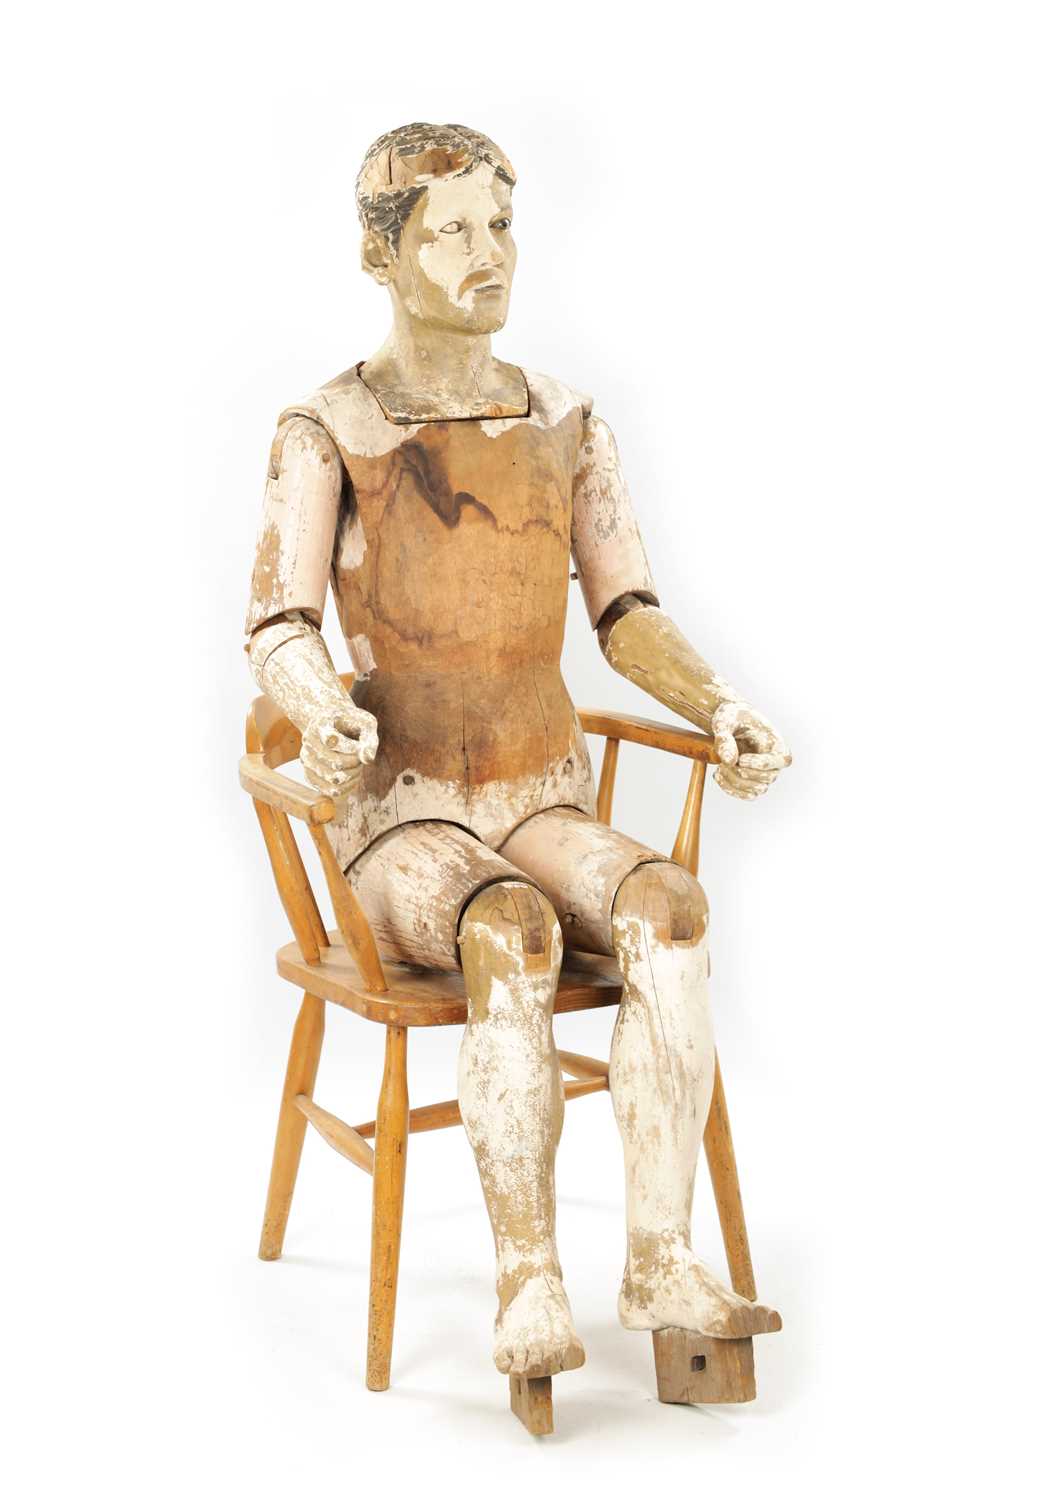 A LATE 19TH CENTURY LIFE-SIZE CARVED HARDWOOD LAY FIGURE